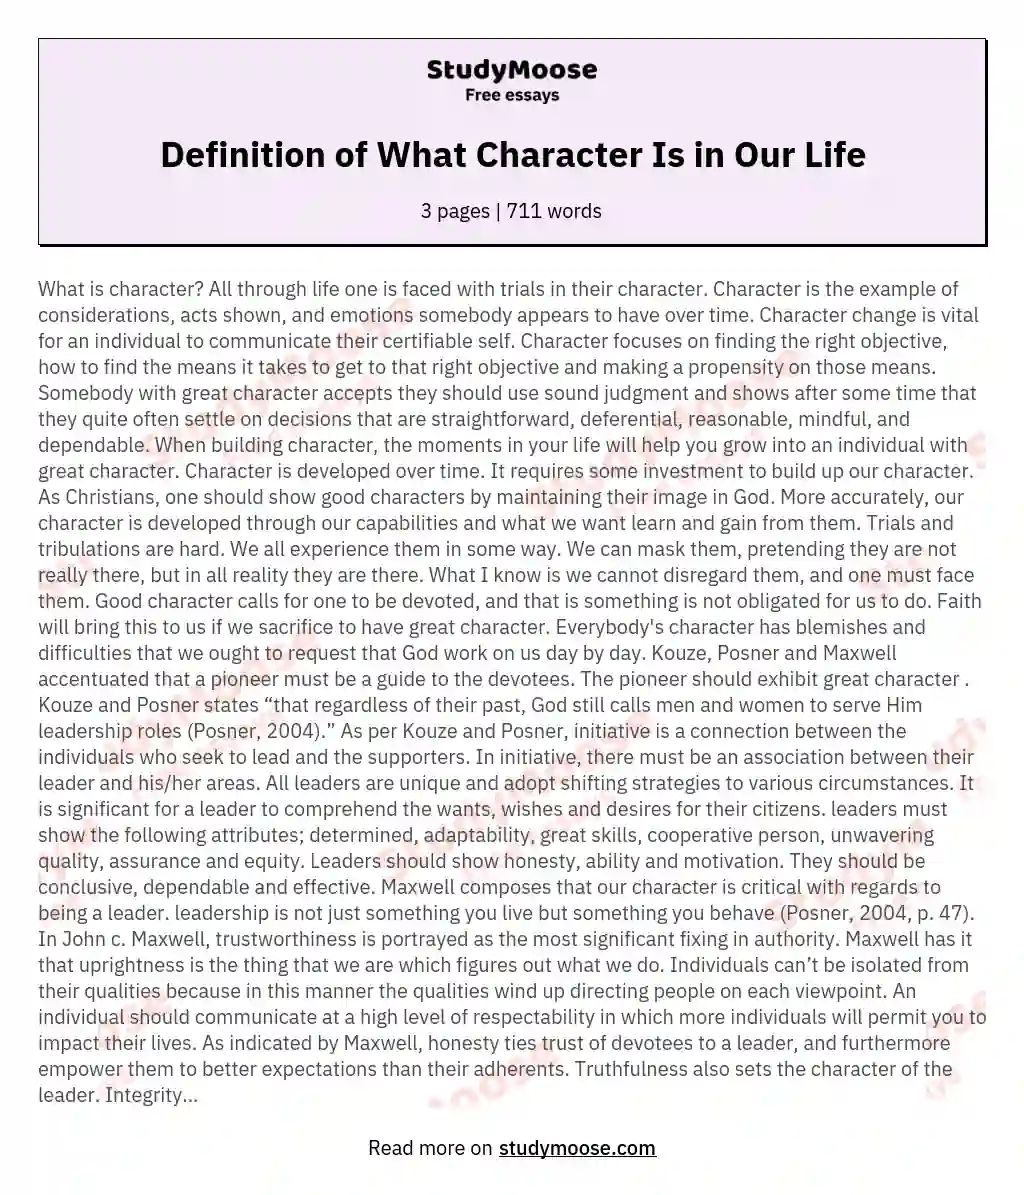 Definition of What Character Is in Our Life essay